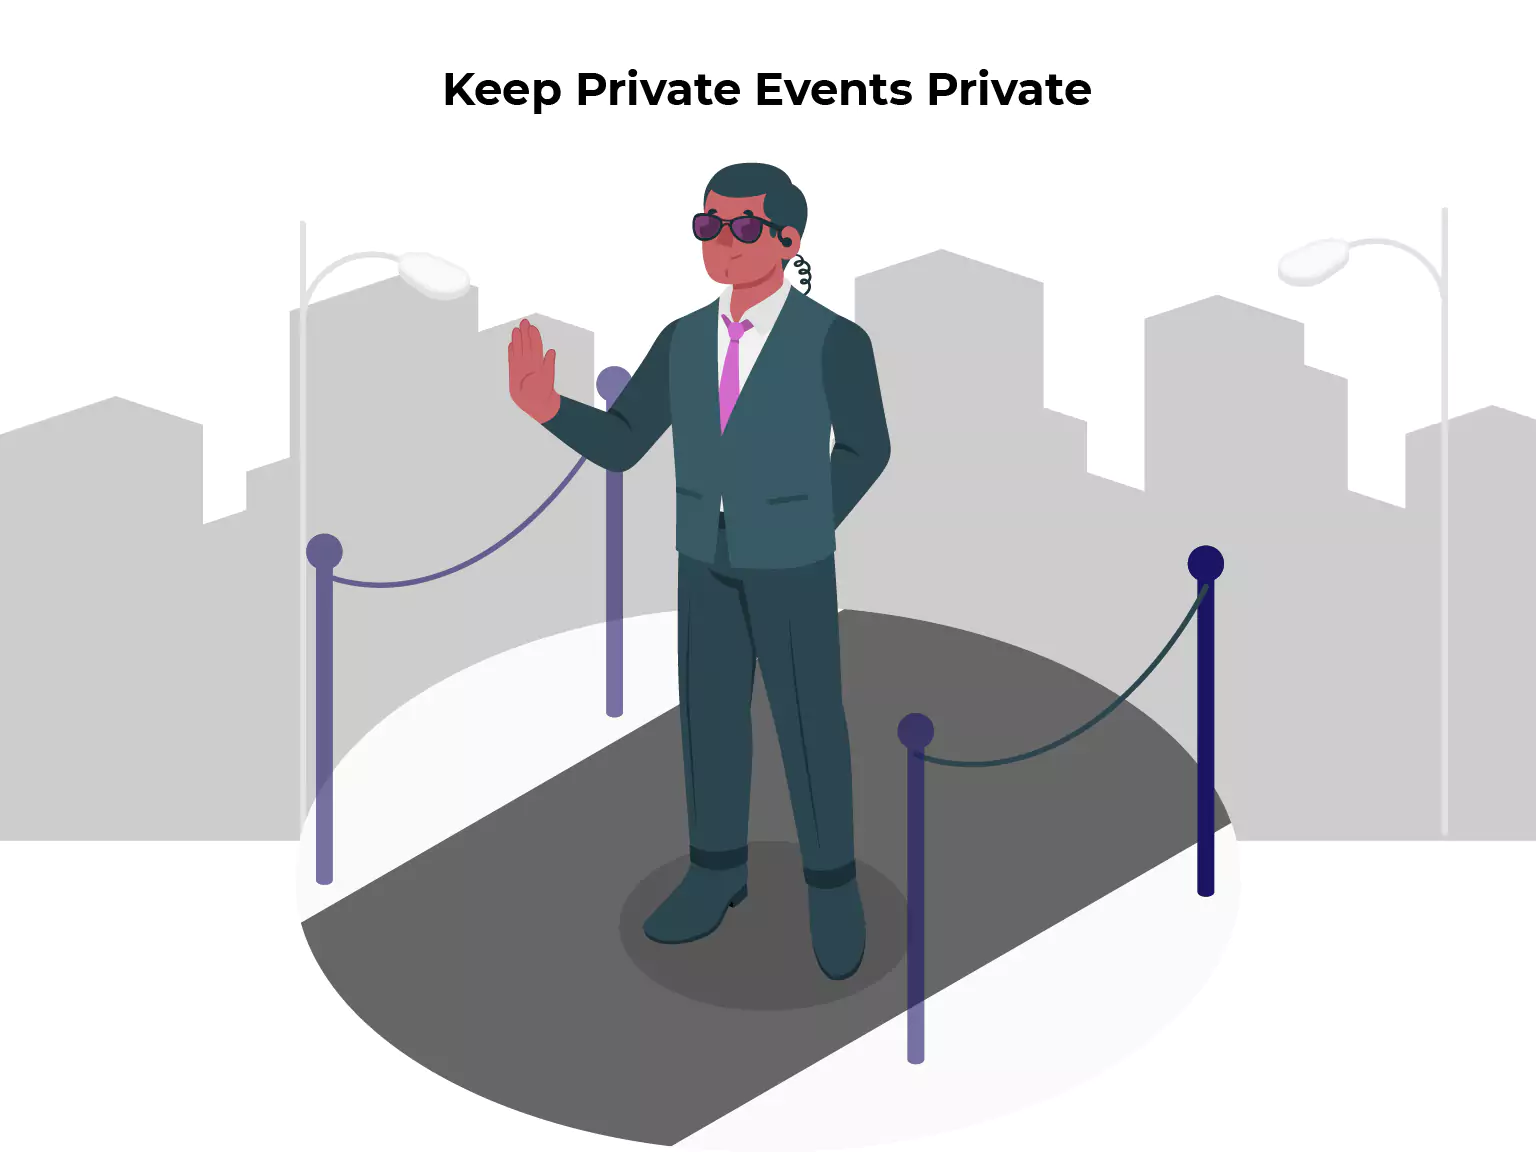 Keep Private Events Private